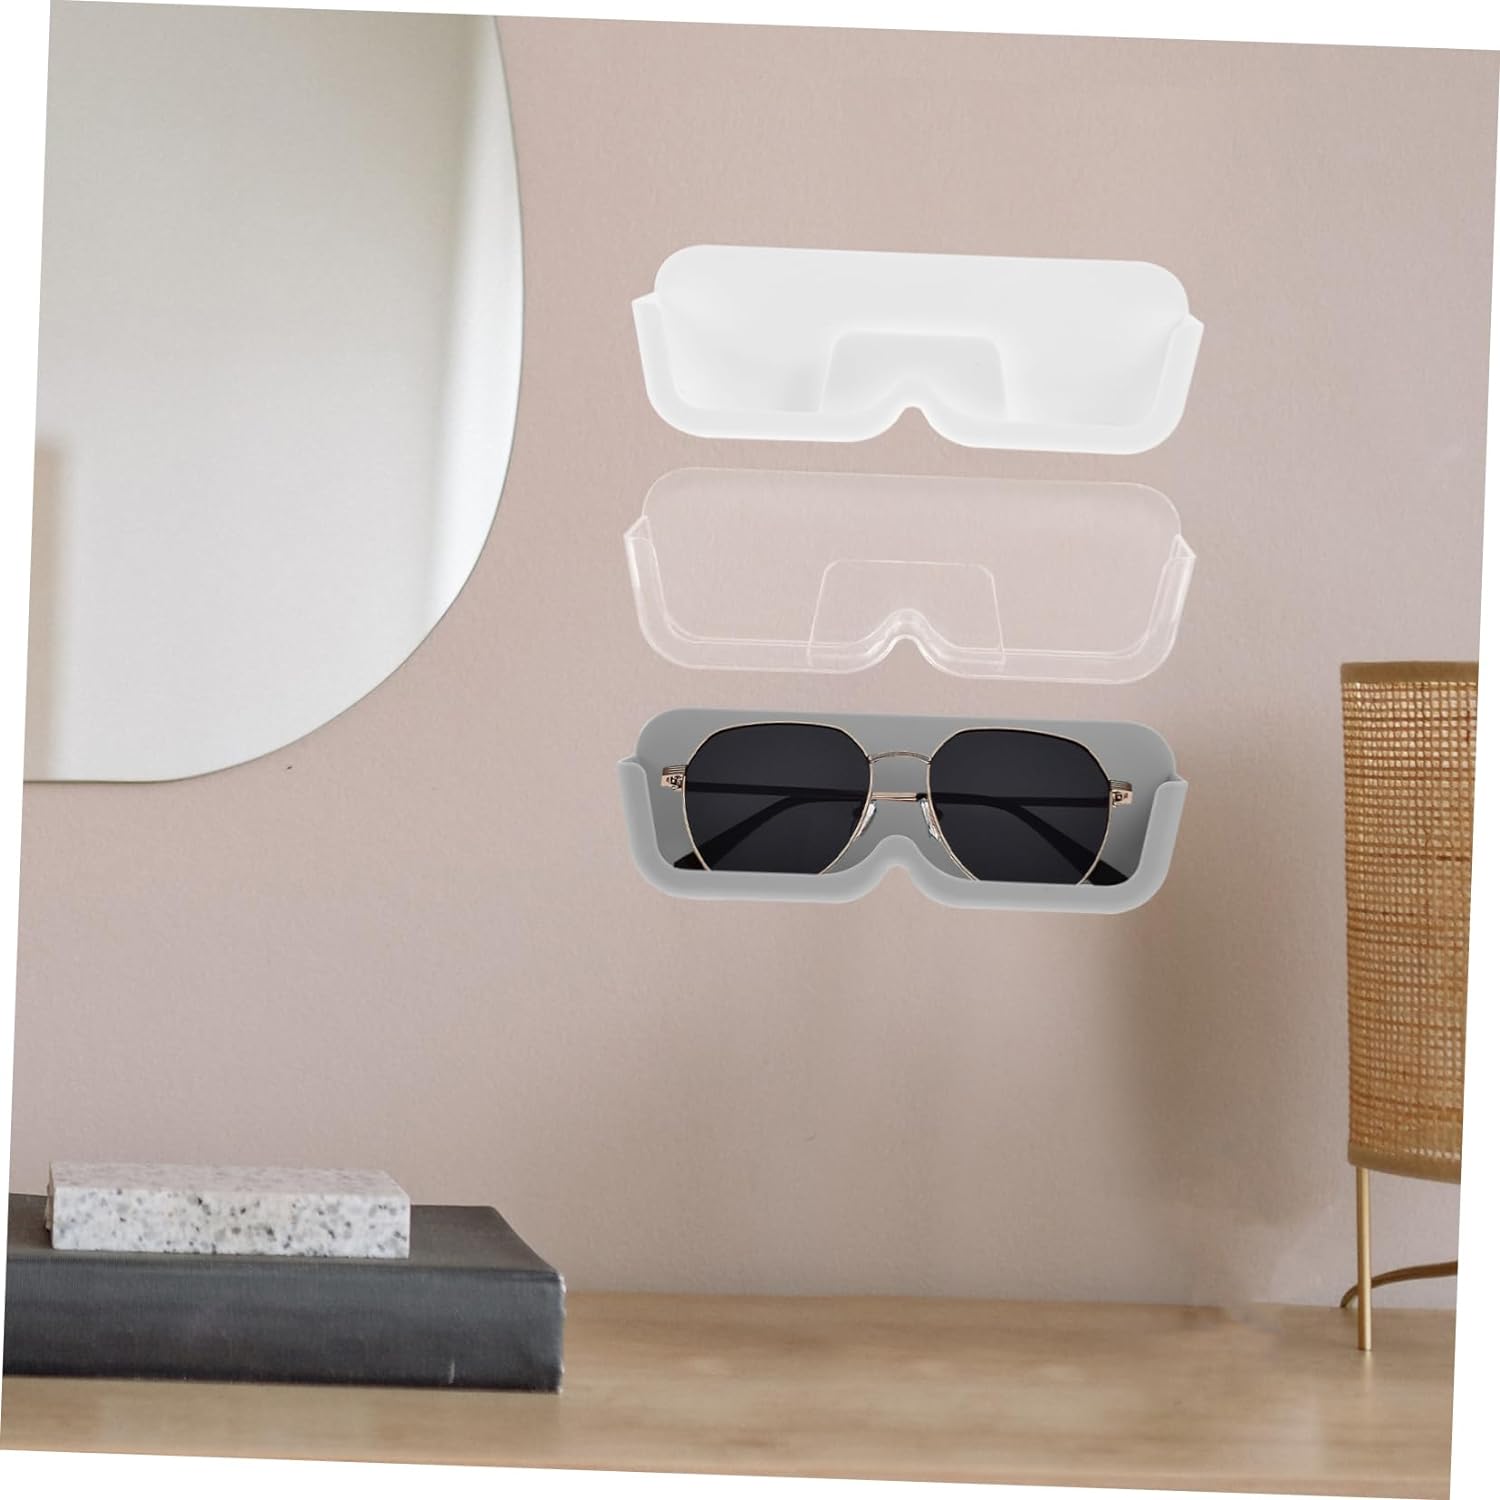 3 Sets of Wall Mounted Eye Glass Holder.